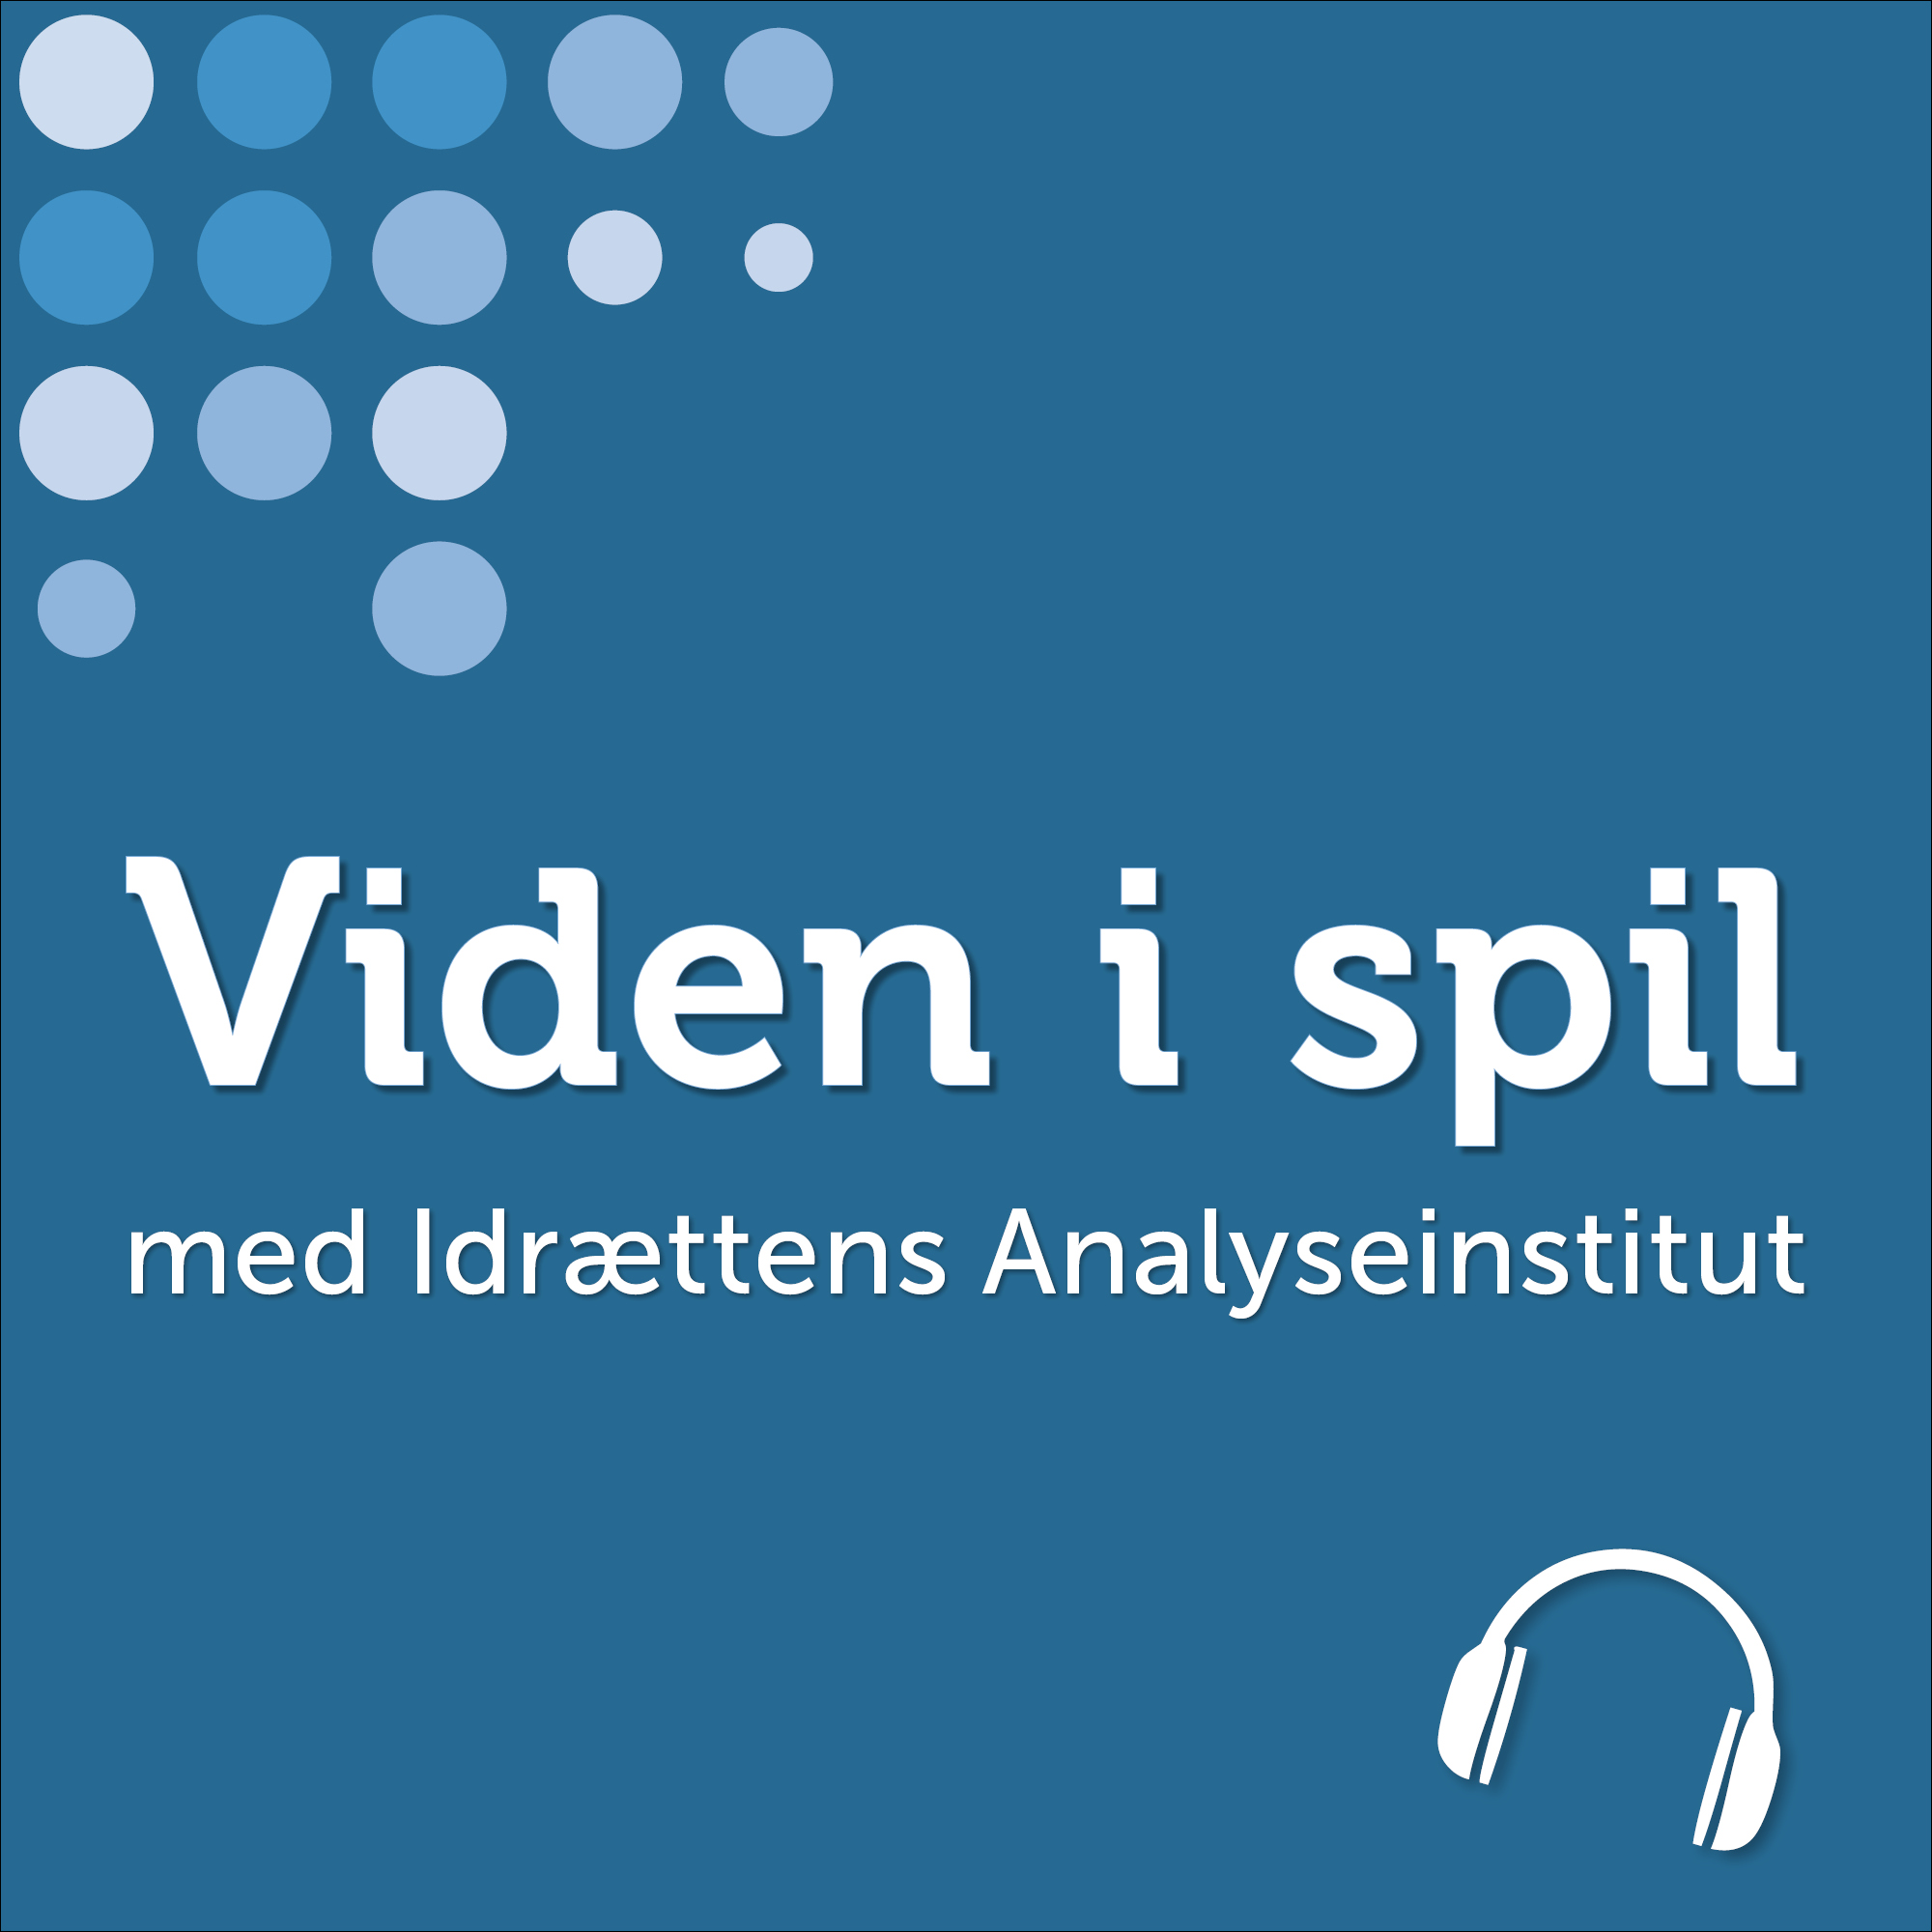 Read more about the article Viden i spil med Idrættens Analyseinstitut